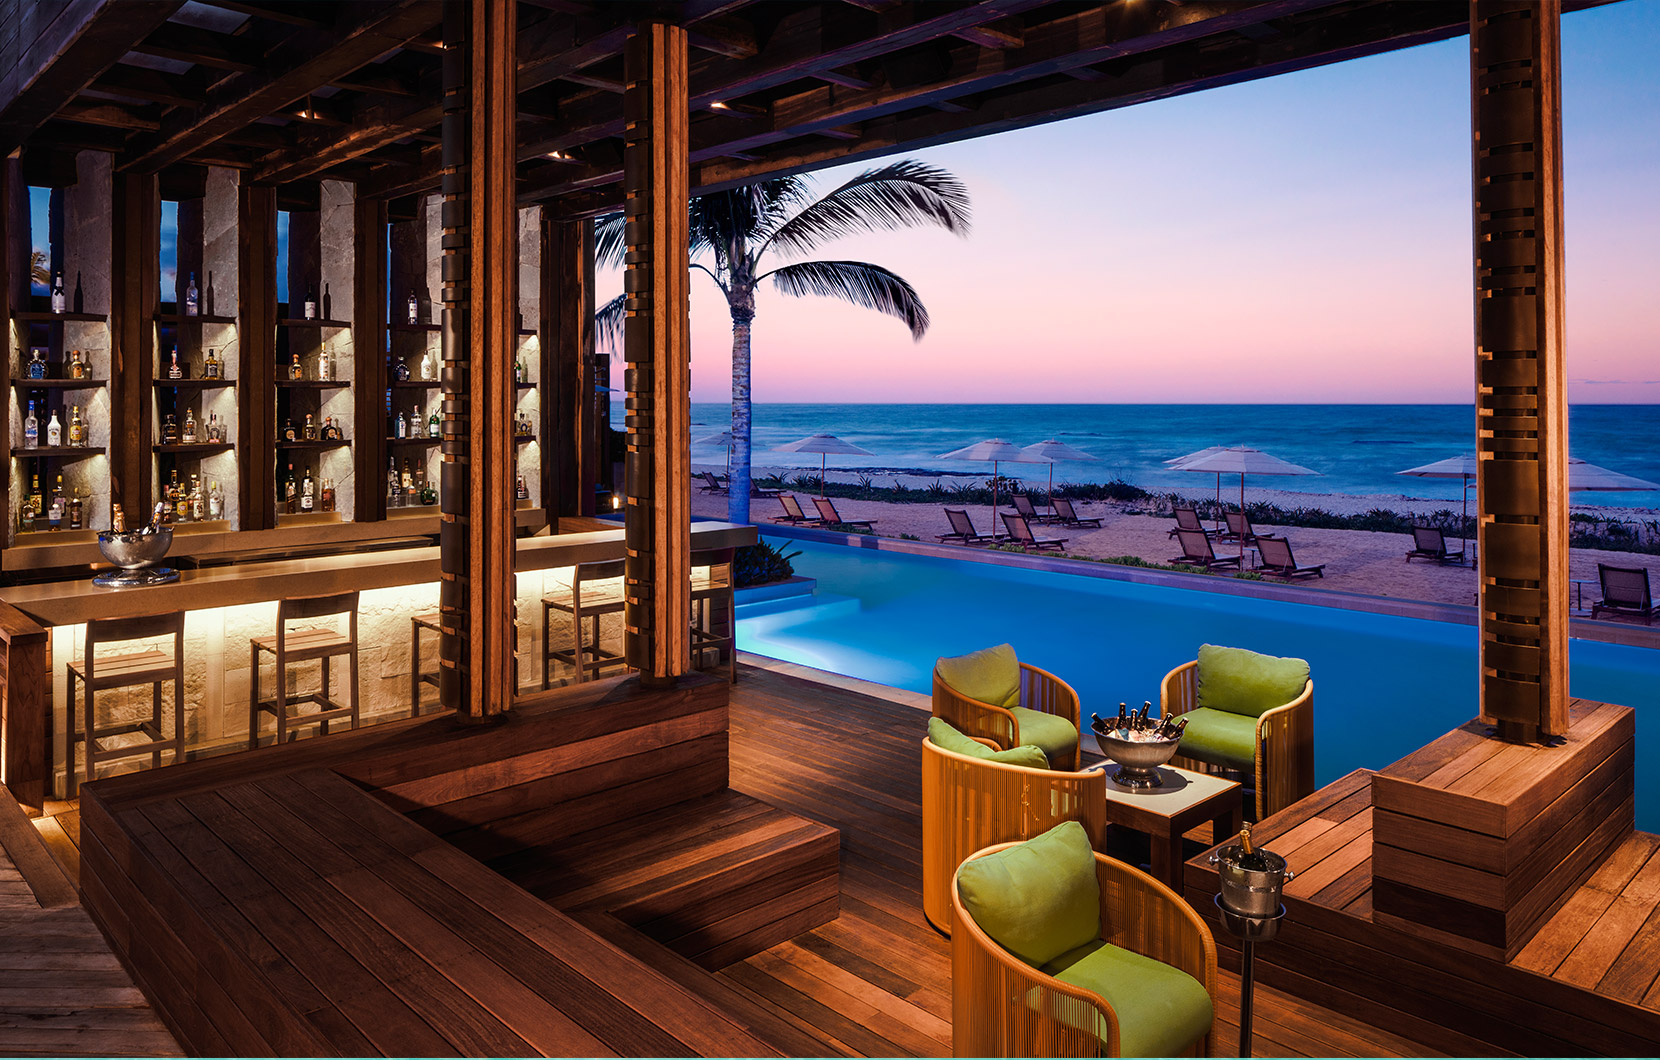 This VIP bar in The Beach Club offers a secluded corner of paradise.